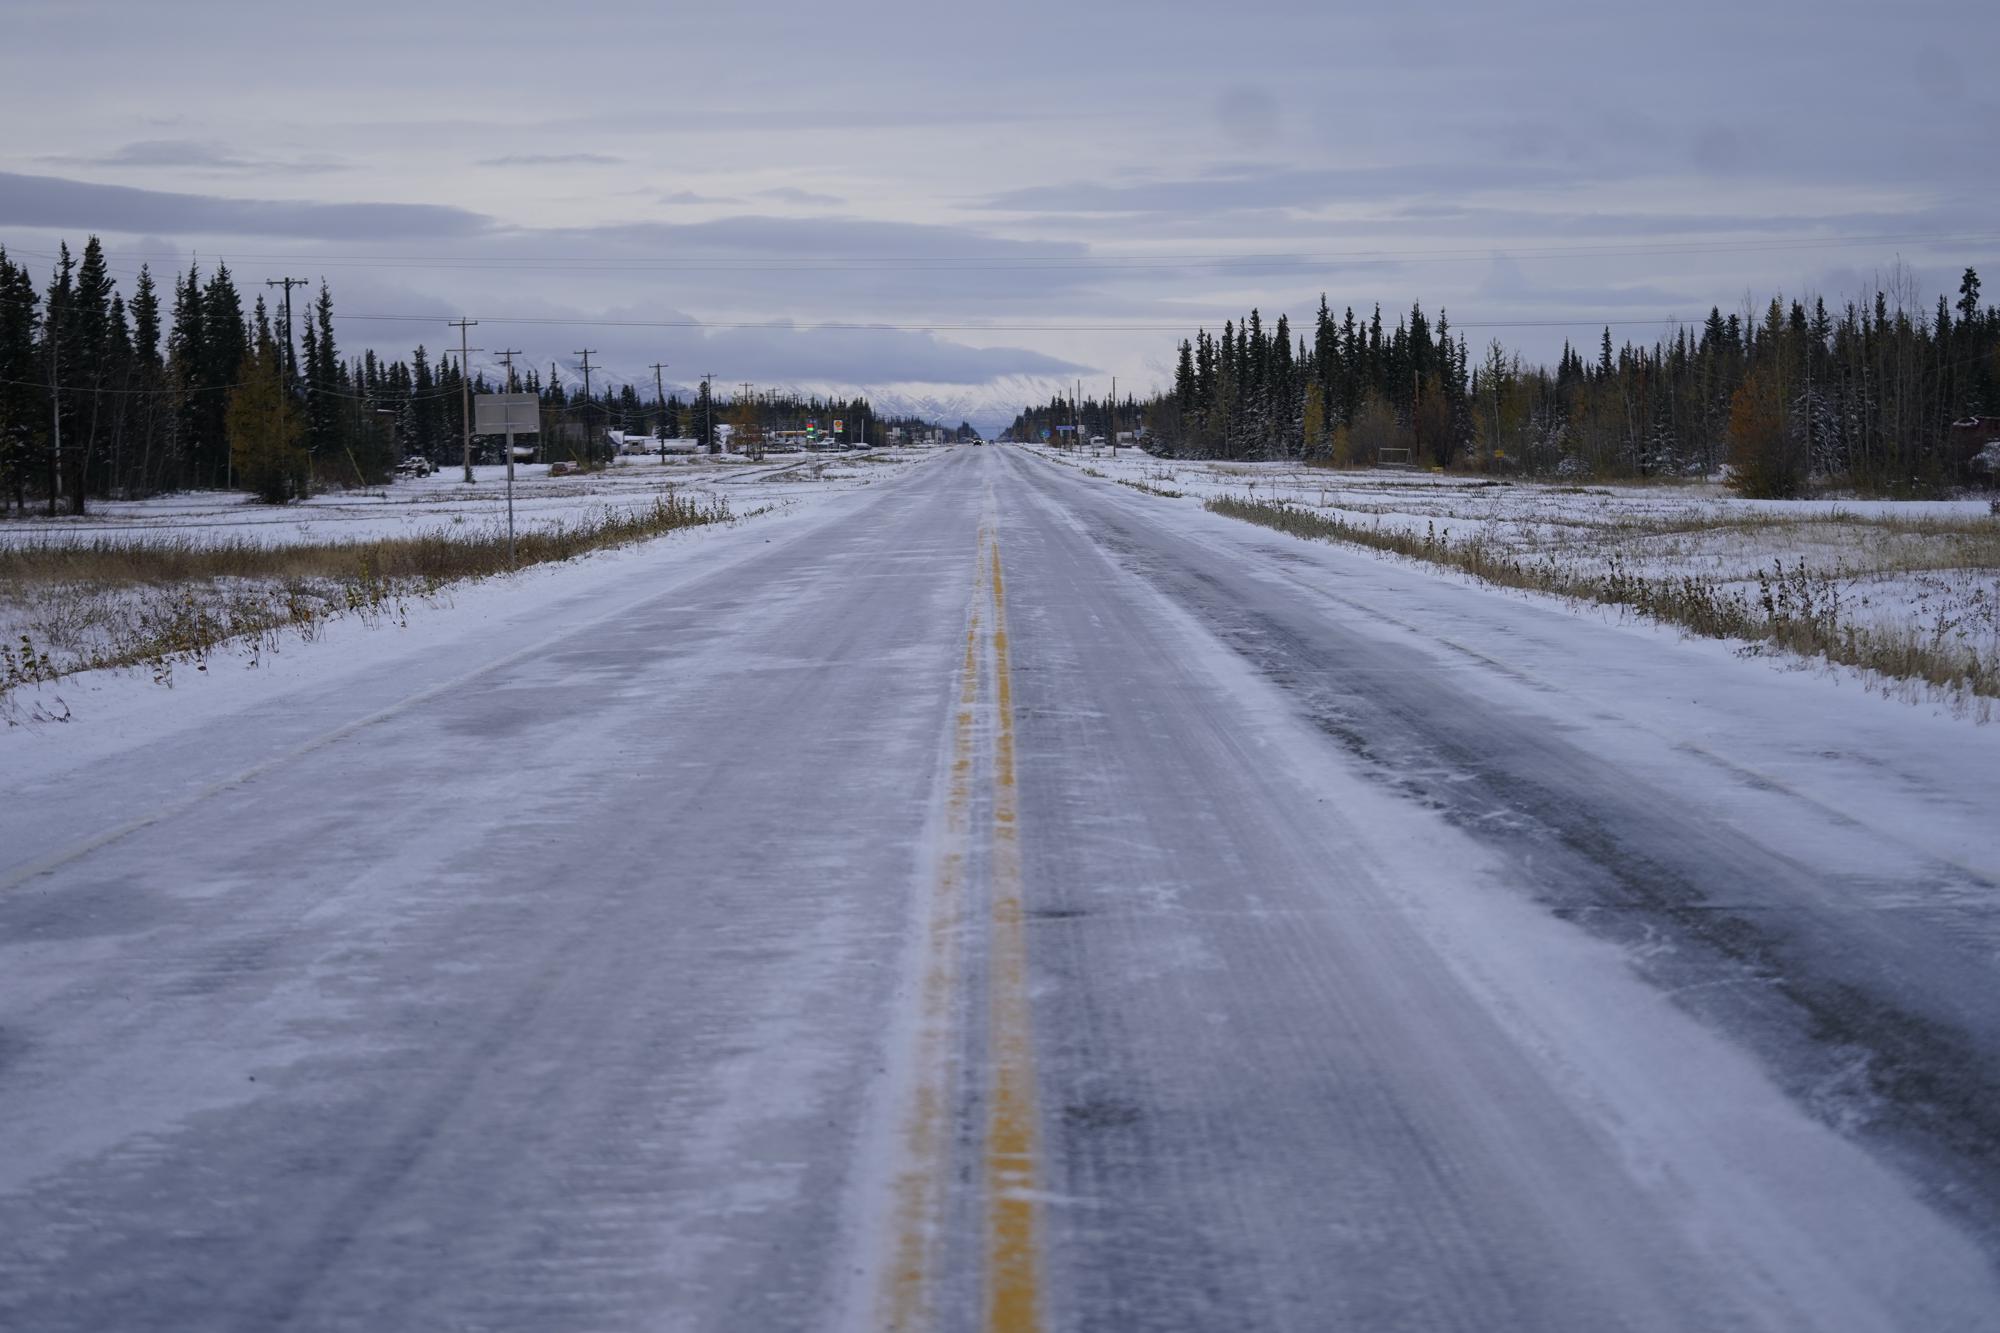 Ice and snow covers the Alaska Highway Wednesday, Sept. 22, 2021, in Tok, Alaska. The state is experiencing one of the sharpest rises in COVID-19 cases in the country, coupled with a limited statewide healthcare system that is almost entirely reliant on Anchorage hospitals. (AP Photo/Rick Bowmer)